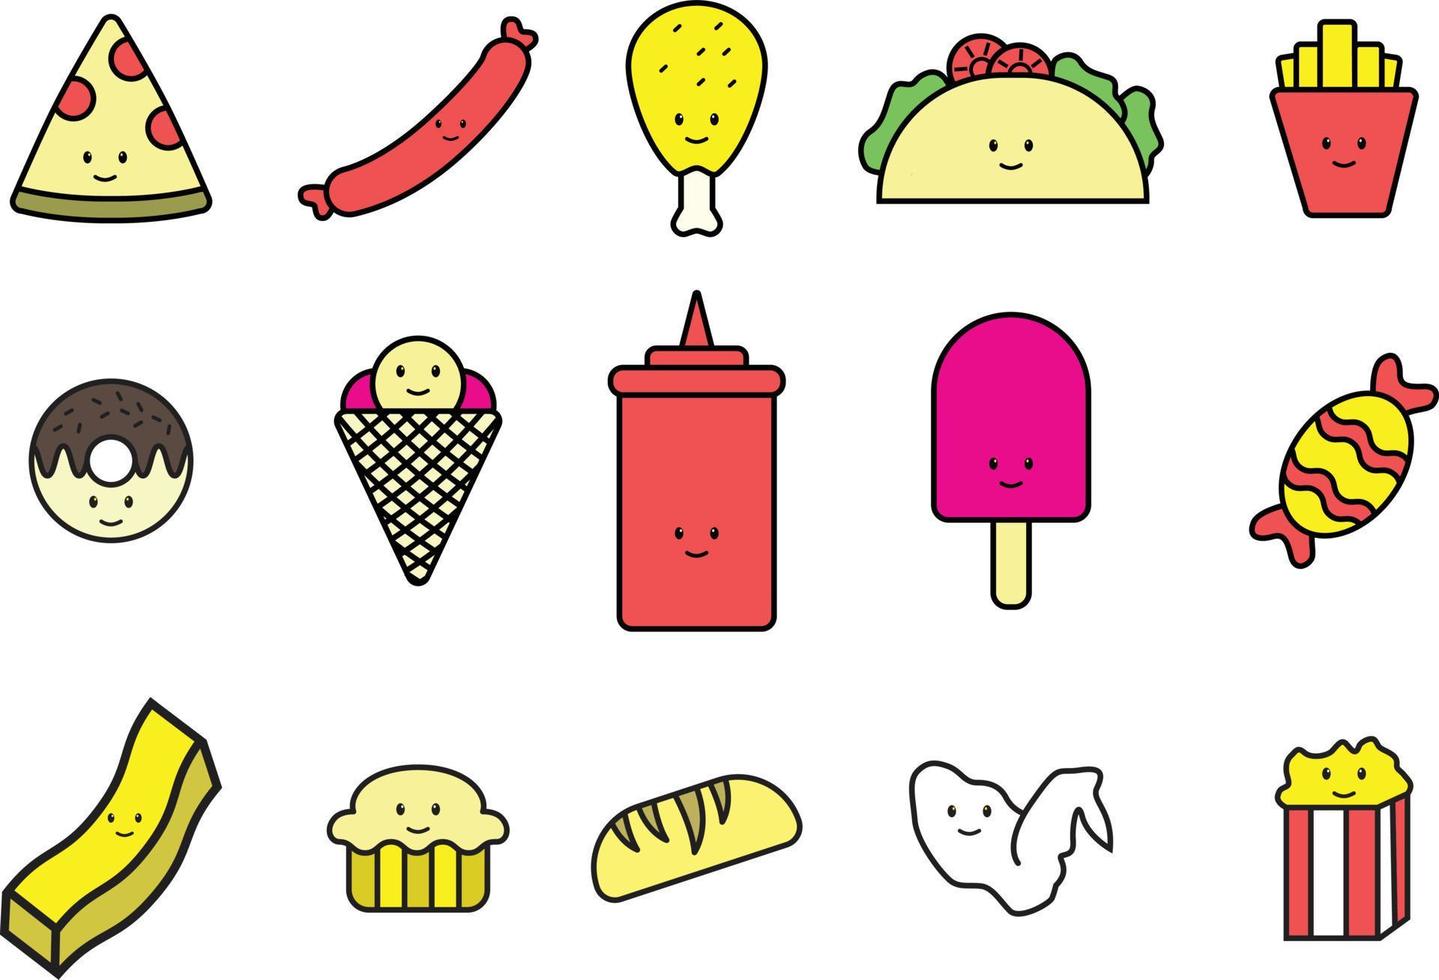 Cute Kawaii Icon Illustration For Restaurant Caffe Food and Beverage Business vector